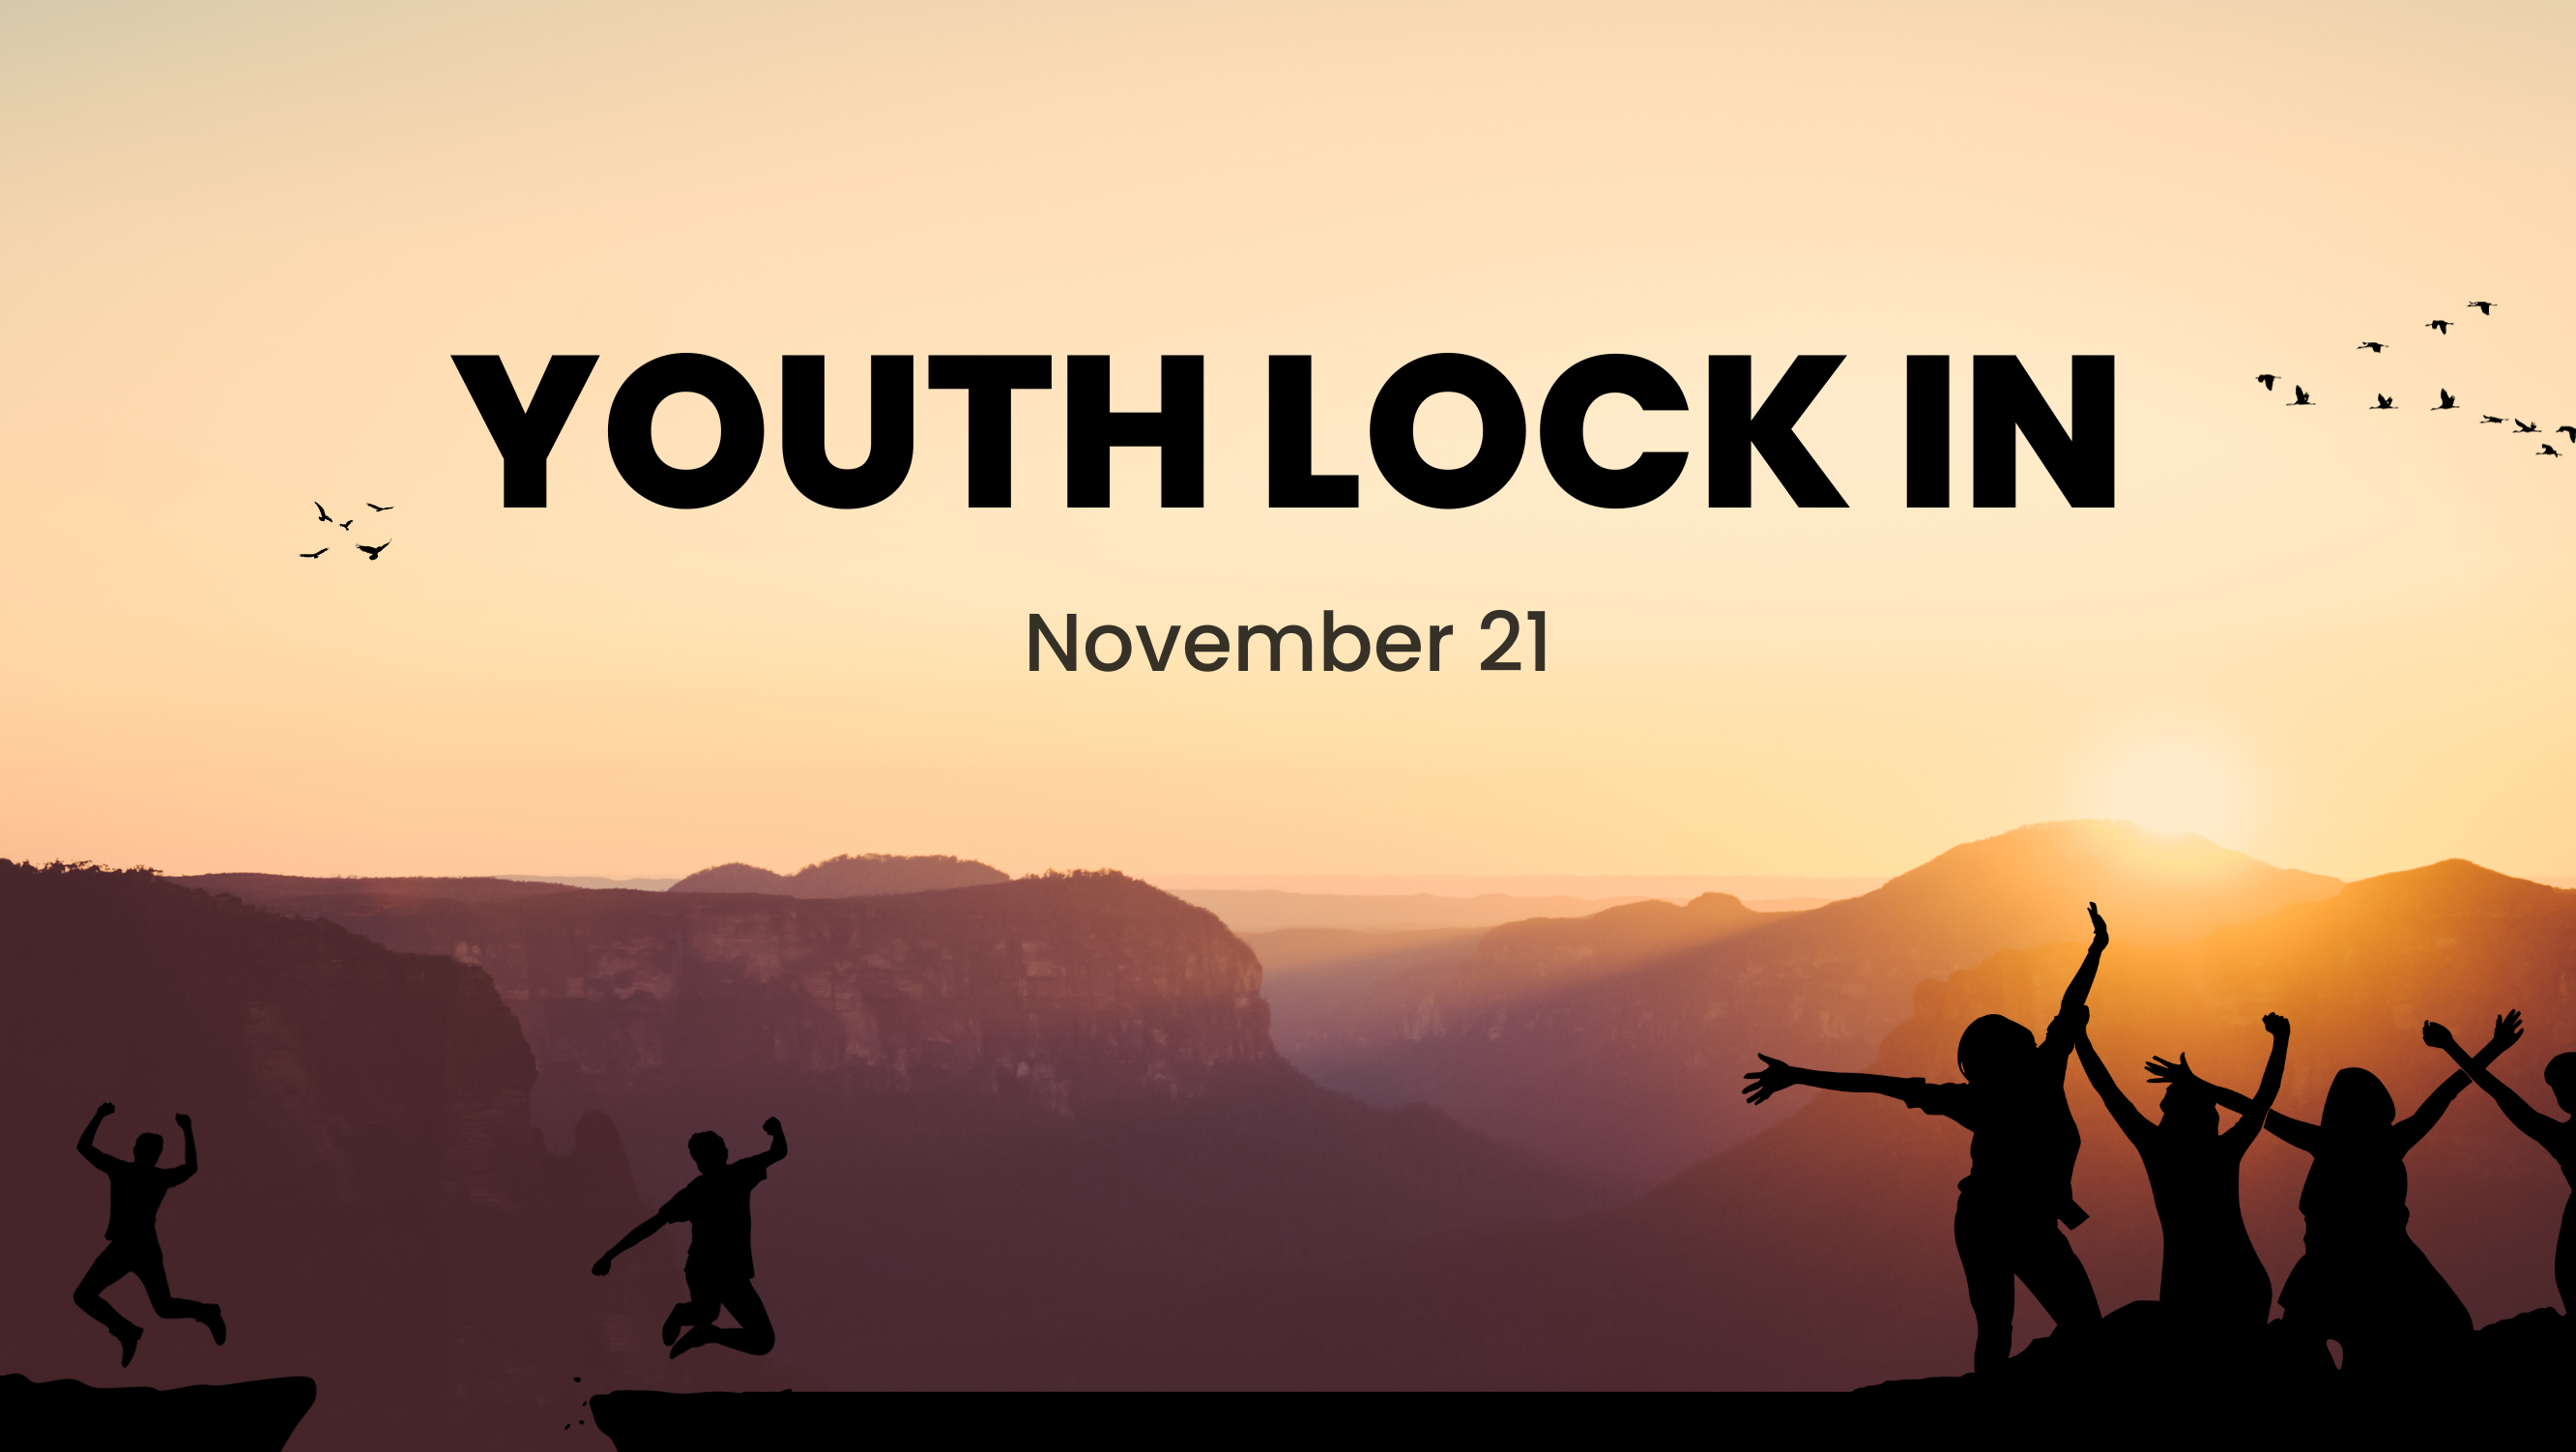 Daytime Lock-In Coming Up